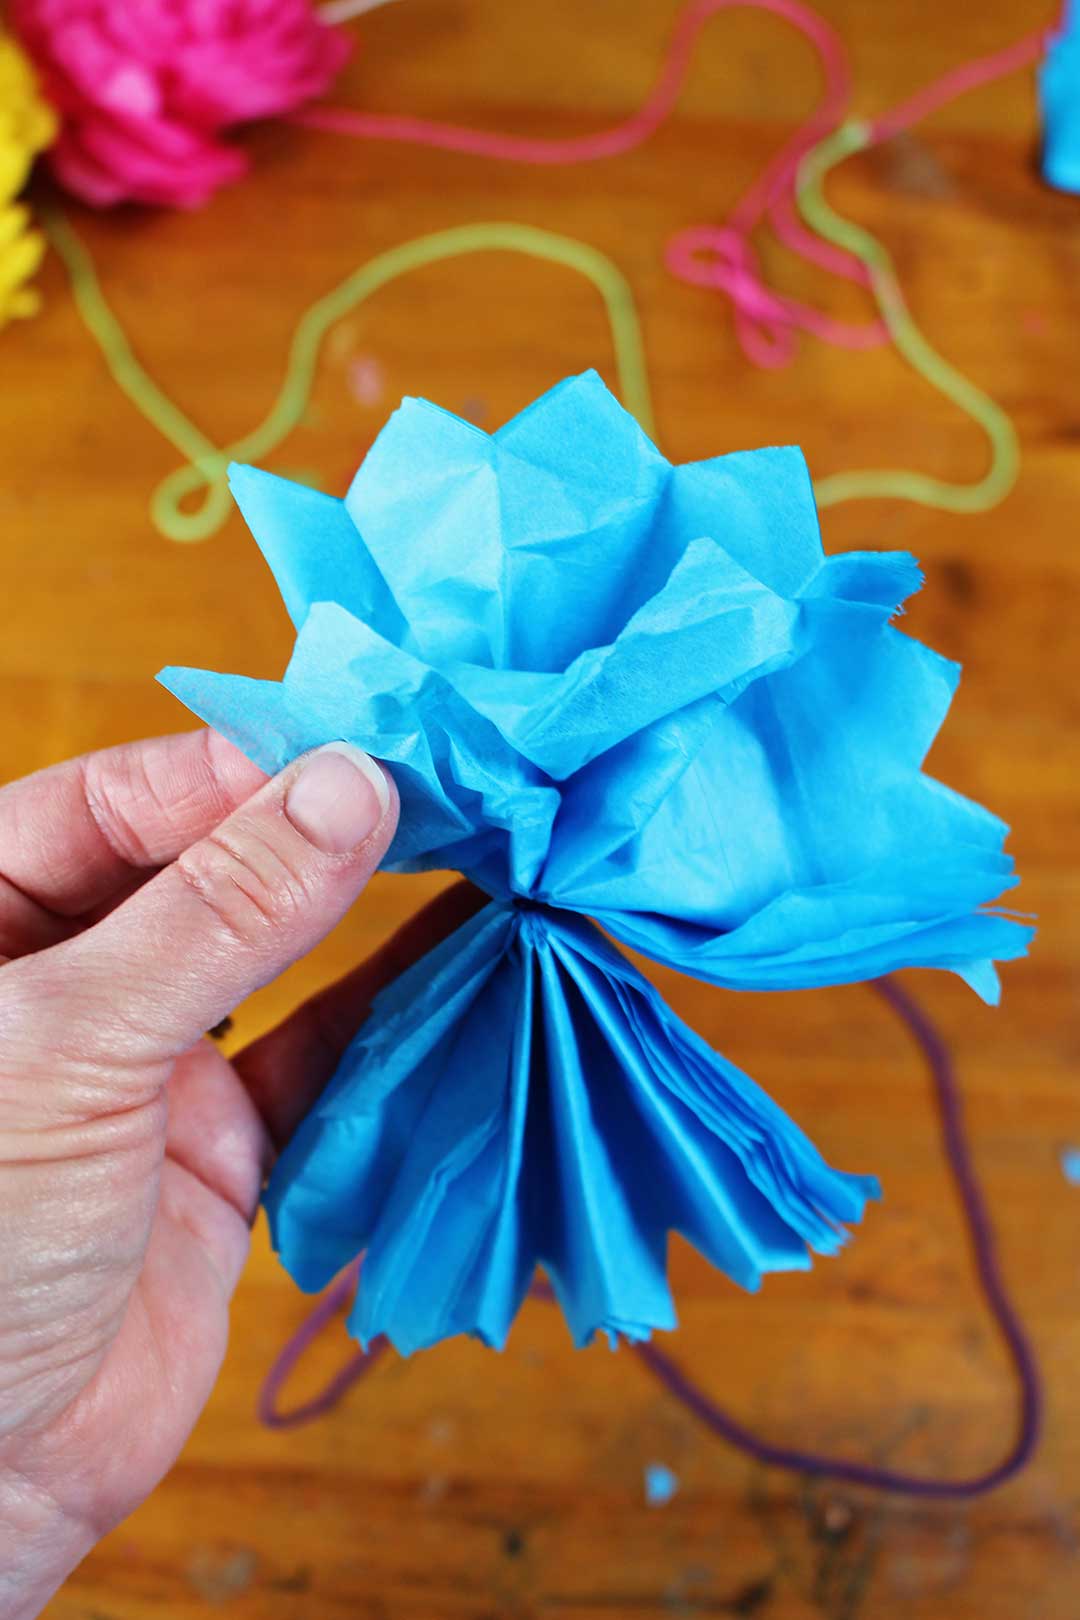 Hand fanning out blue tissue paper flower.